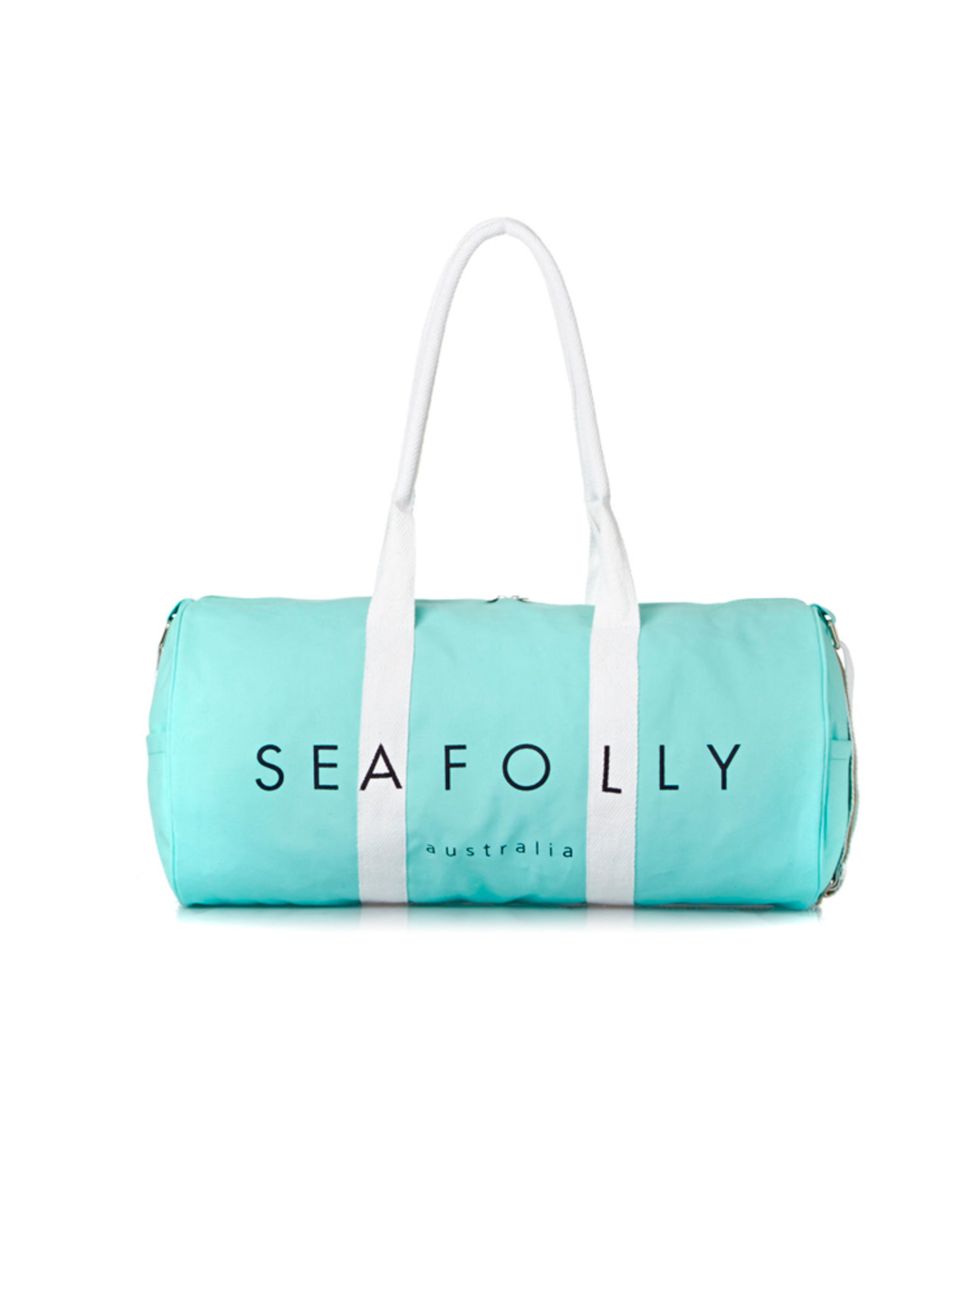 <p>Seafolly gymbag, £39, from <a href="https://www.surfdome.com/seafolly_bags_-_seafolly_trainer_gym_bag_-_mint-215186" target="_blank">Surfdome.com</a></p>